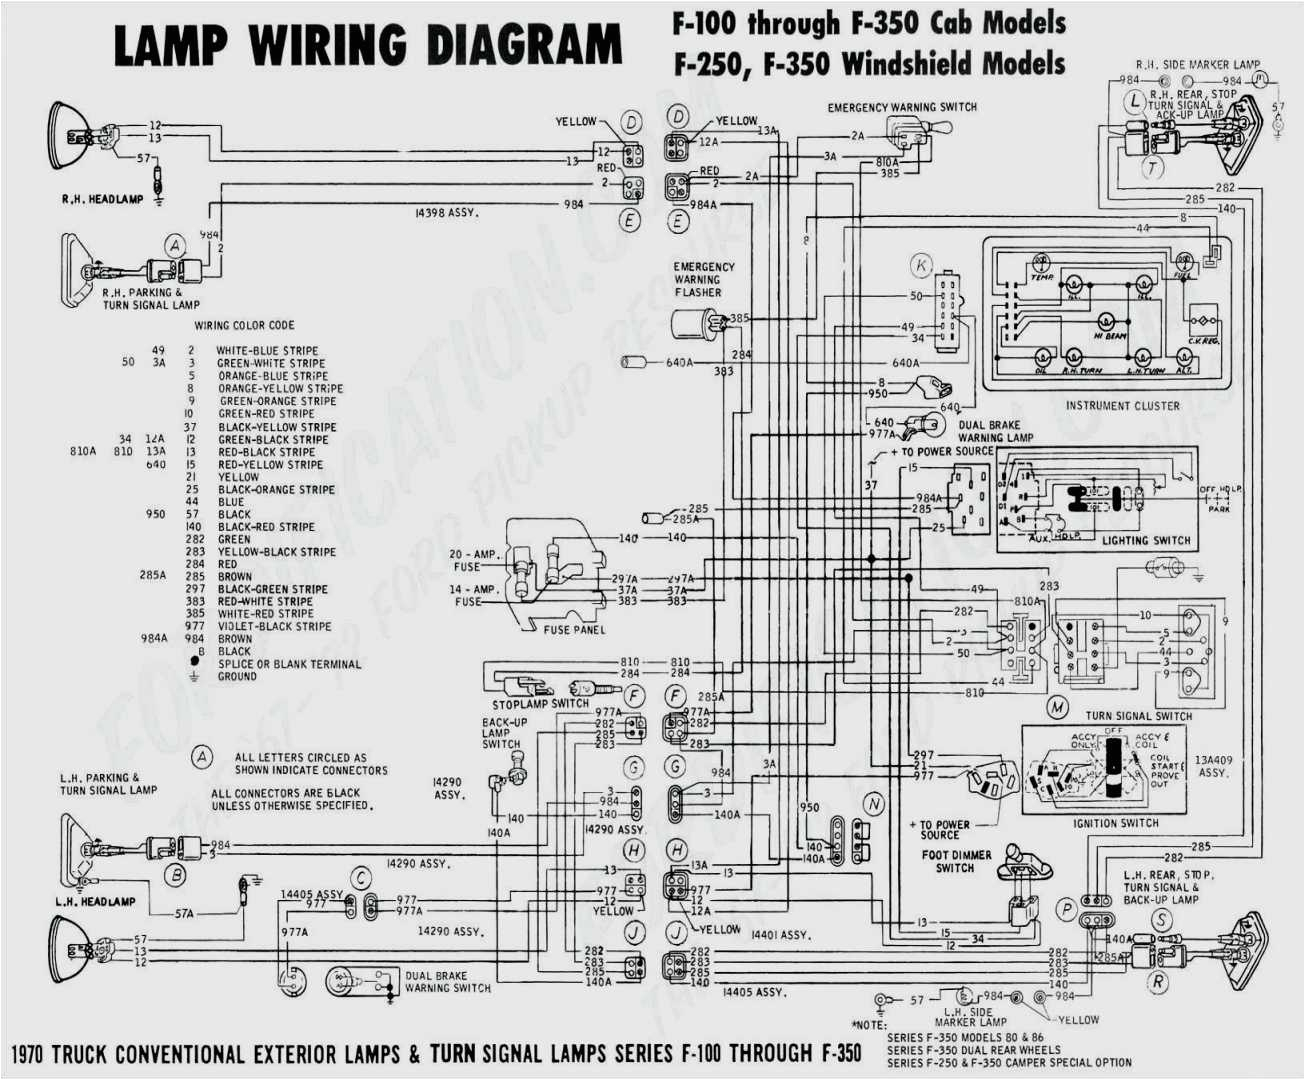 belimo lmb24 3 t wiring diagram 2000 land rover discovery 2 wiring belimo lmb24 3 t